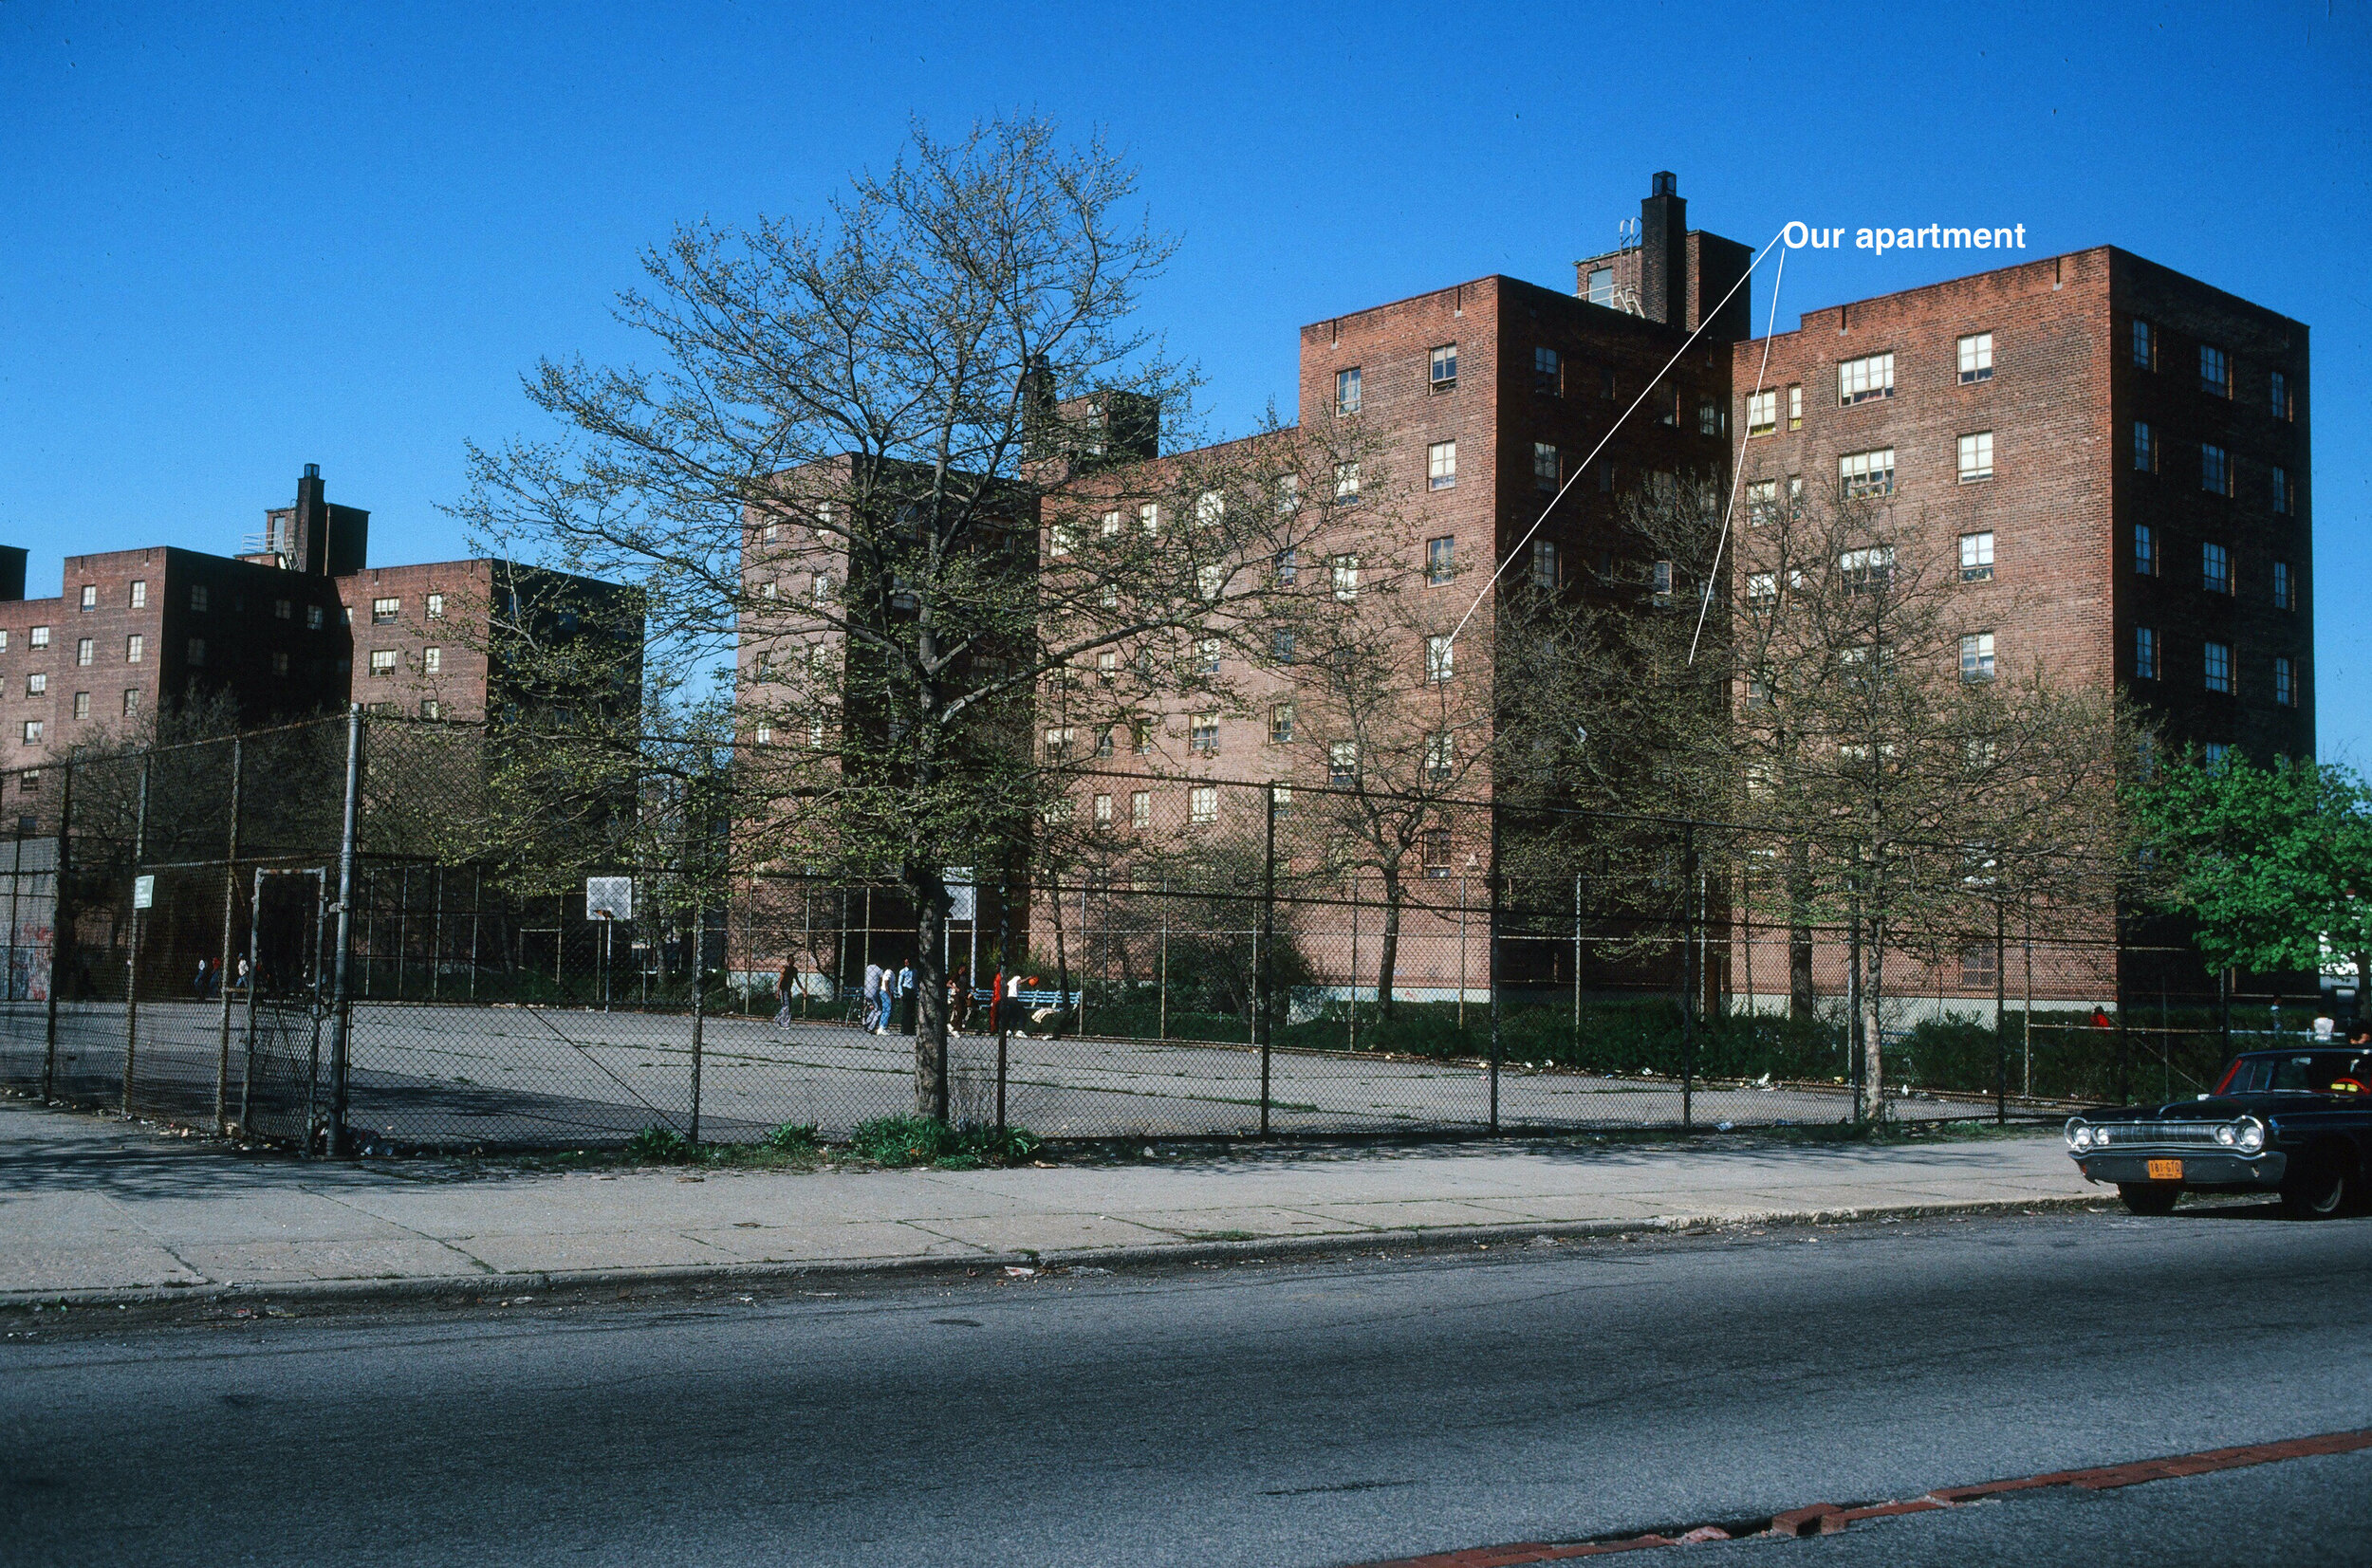  I learned to ride in the playground of our middle income NYC housing project off Beach 54th Street in Arverne (on the Rockaway Peninsula) NYC. I persisted, and after quite a few scrapes was able to ride with no hands on the handlebars. 